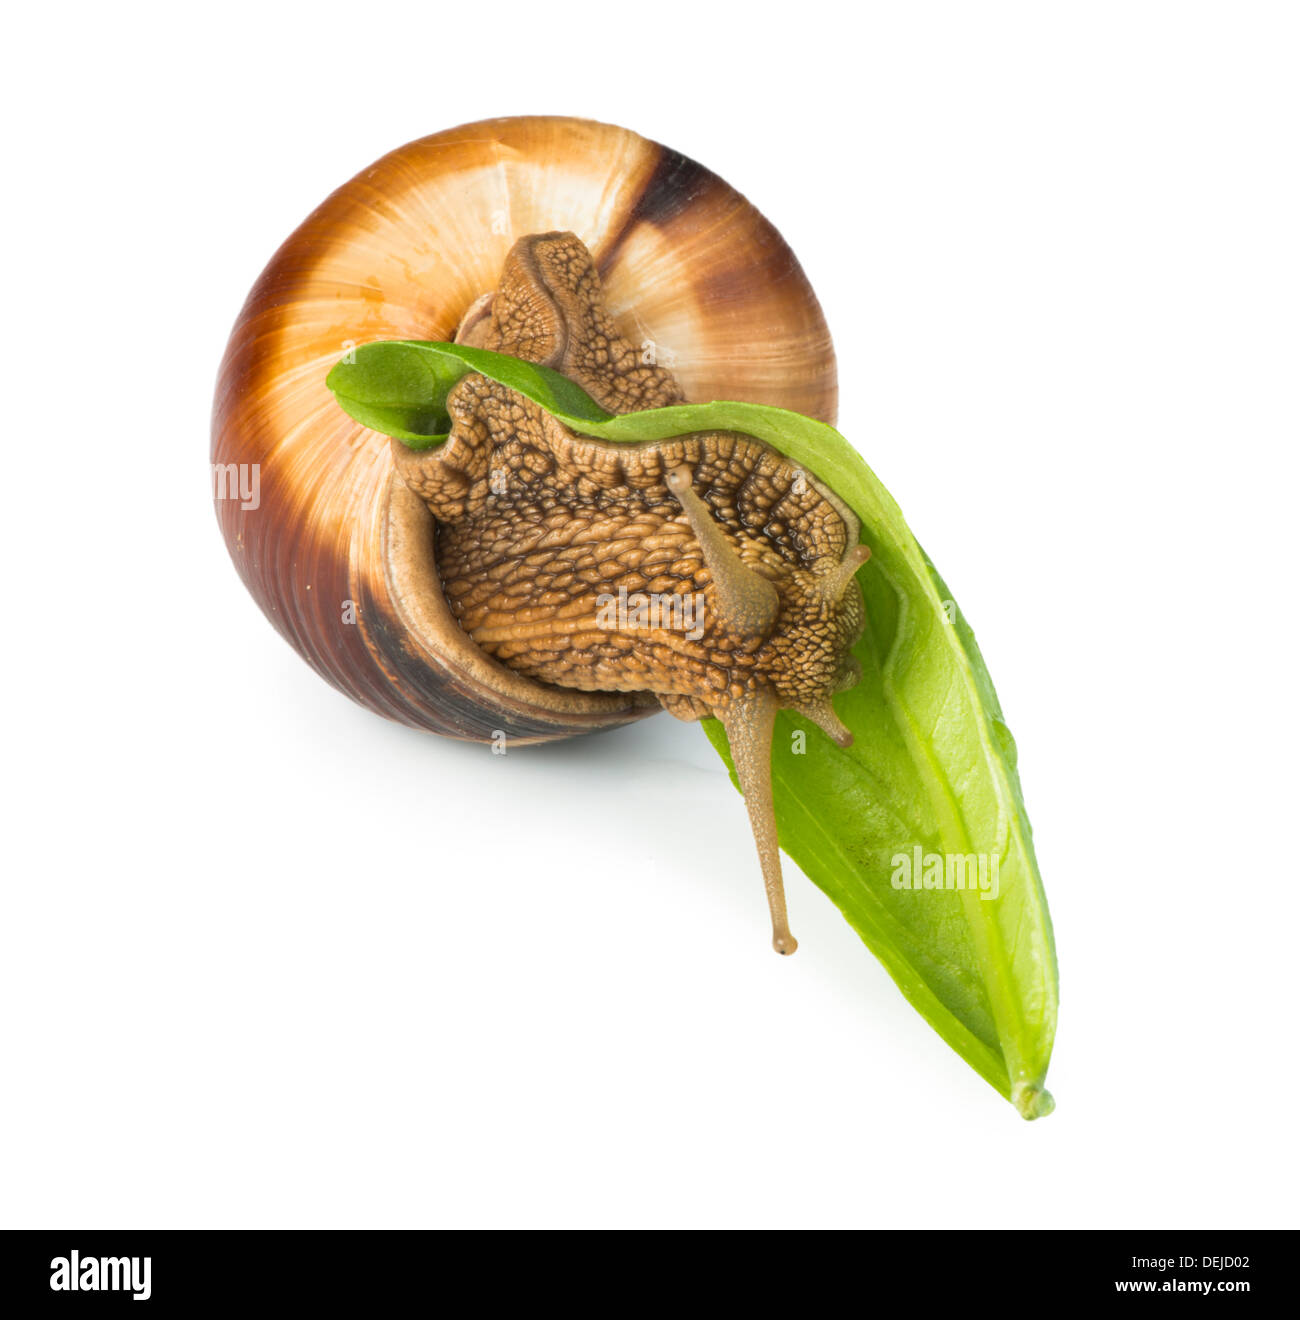 Snail and green leaf. White isolated studio shot. Stock Photo